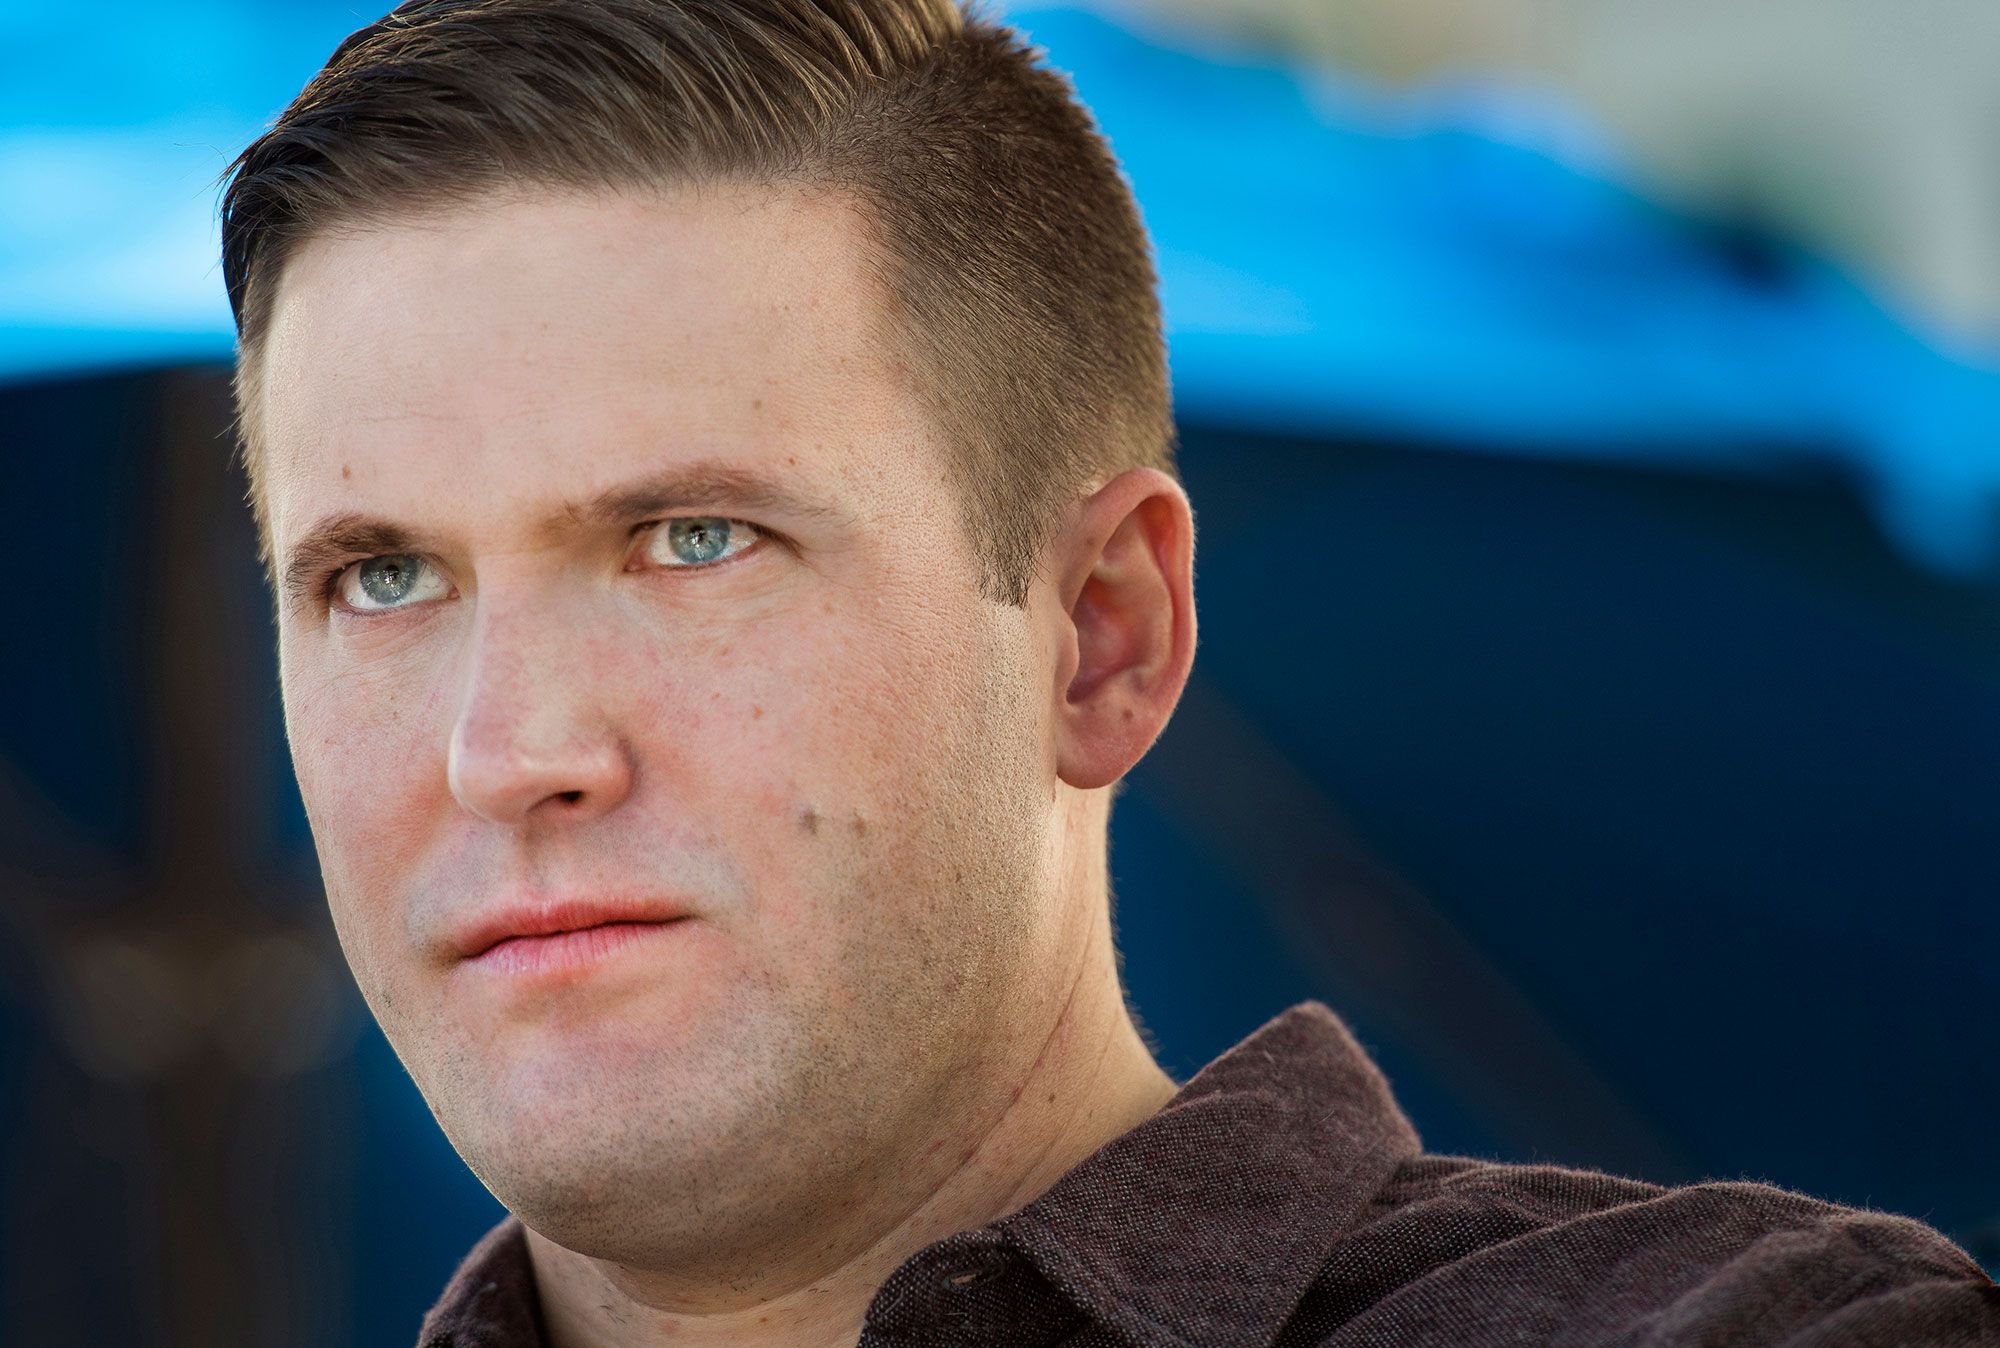 High And Tight Haircut Adopted By Neo Nazis The Hitler Youth Haircut Is Now Popular With White Supremacists